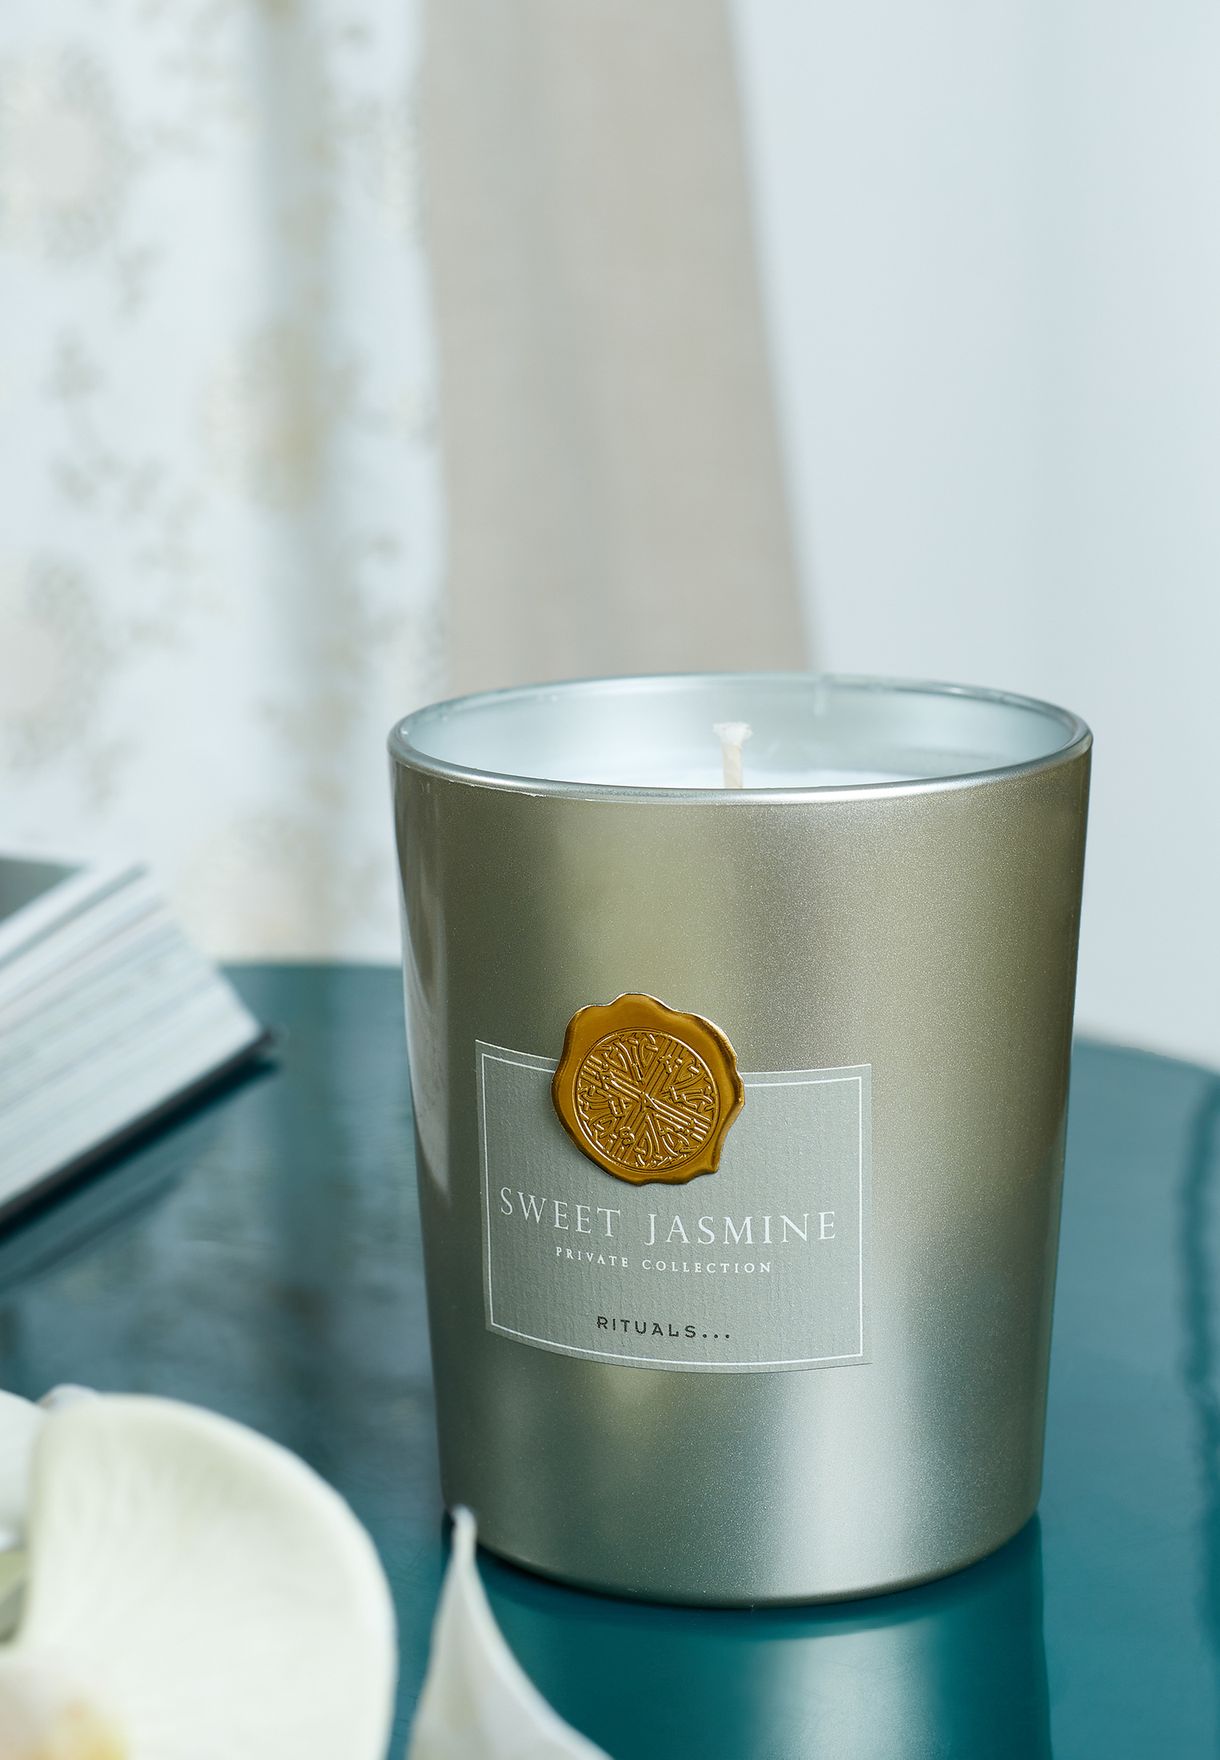 Sweet Jasmine Scented Candle